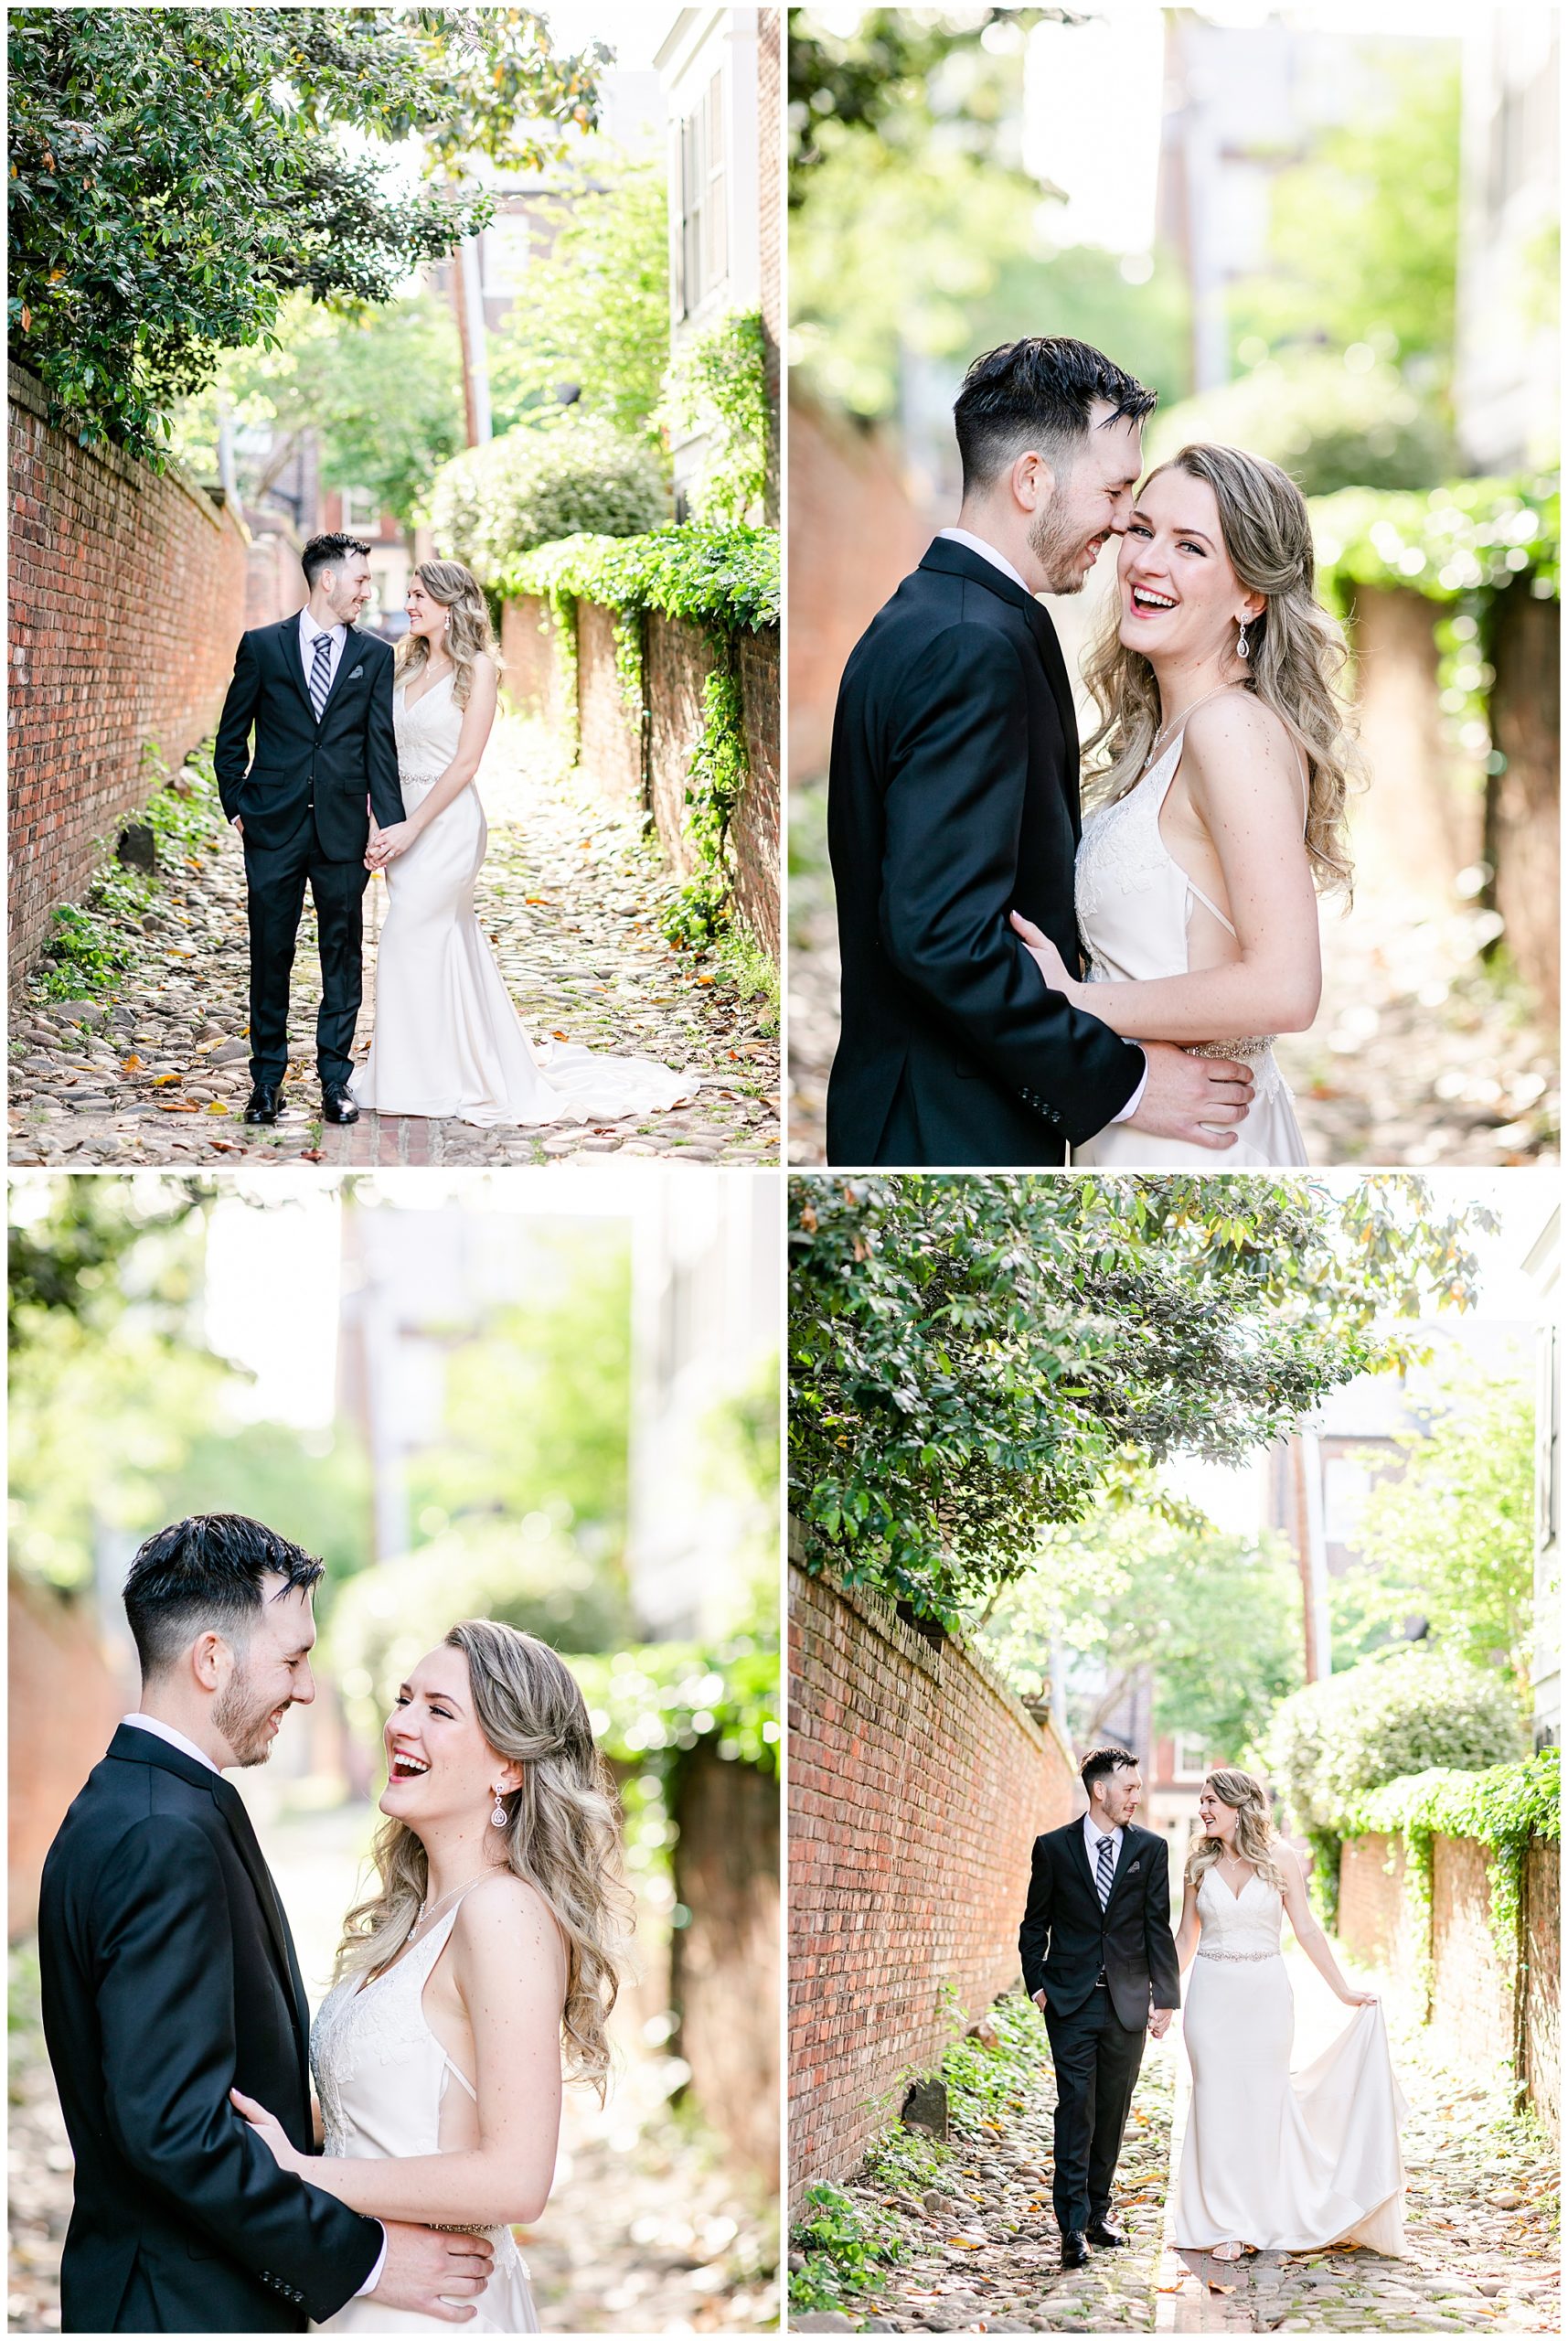 glowing spring Alexandria elopement, Alexandria wedding photographer, Old Town wedding photographer, Old Town Alexandria, Old Town wedding, spring wedding, DC area wedding, DC wedding photographer, Rachel E.H. Photography, classic bride and groom, natural light wedding portraits